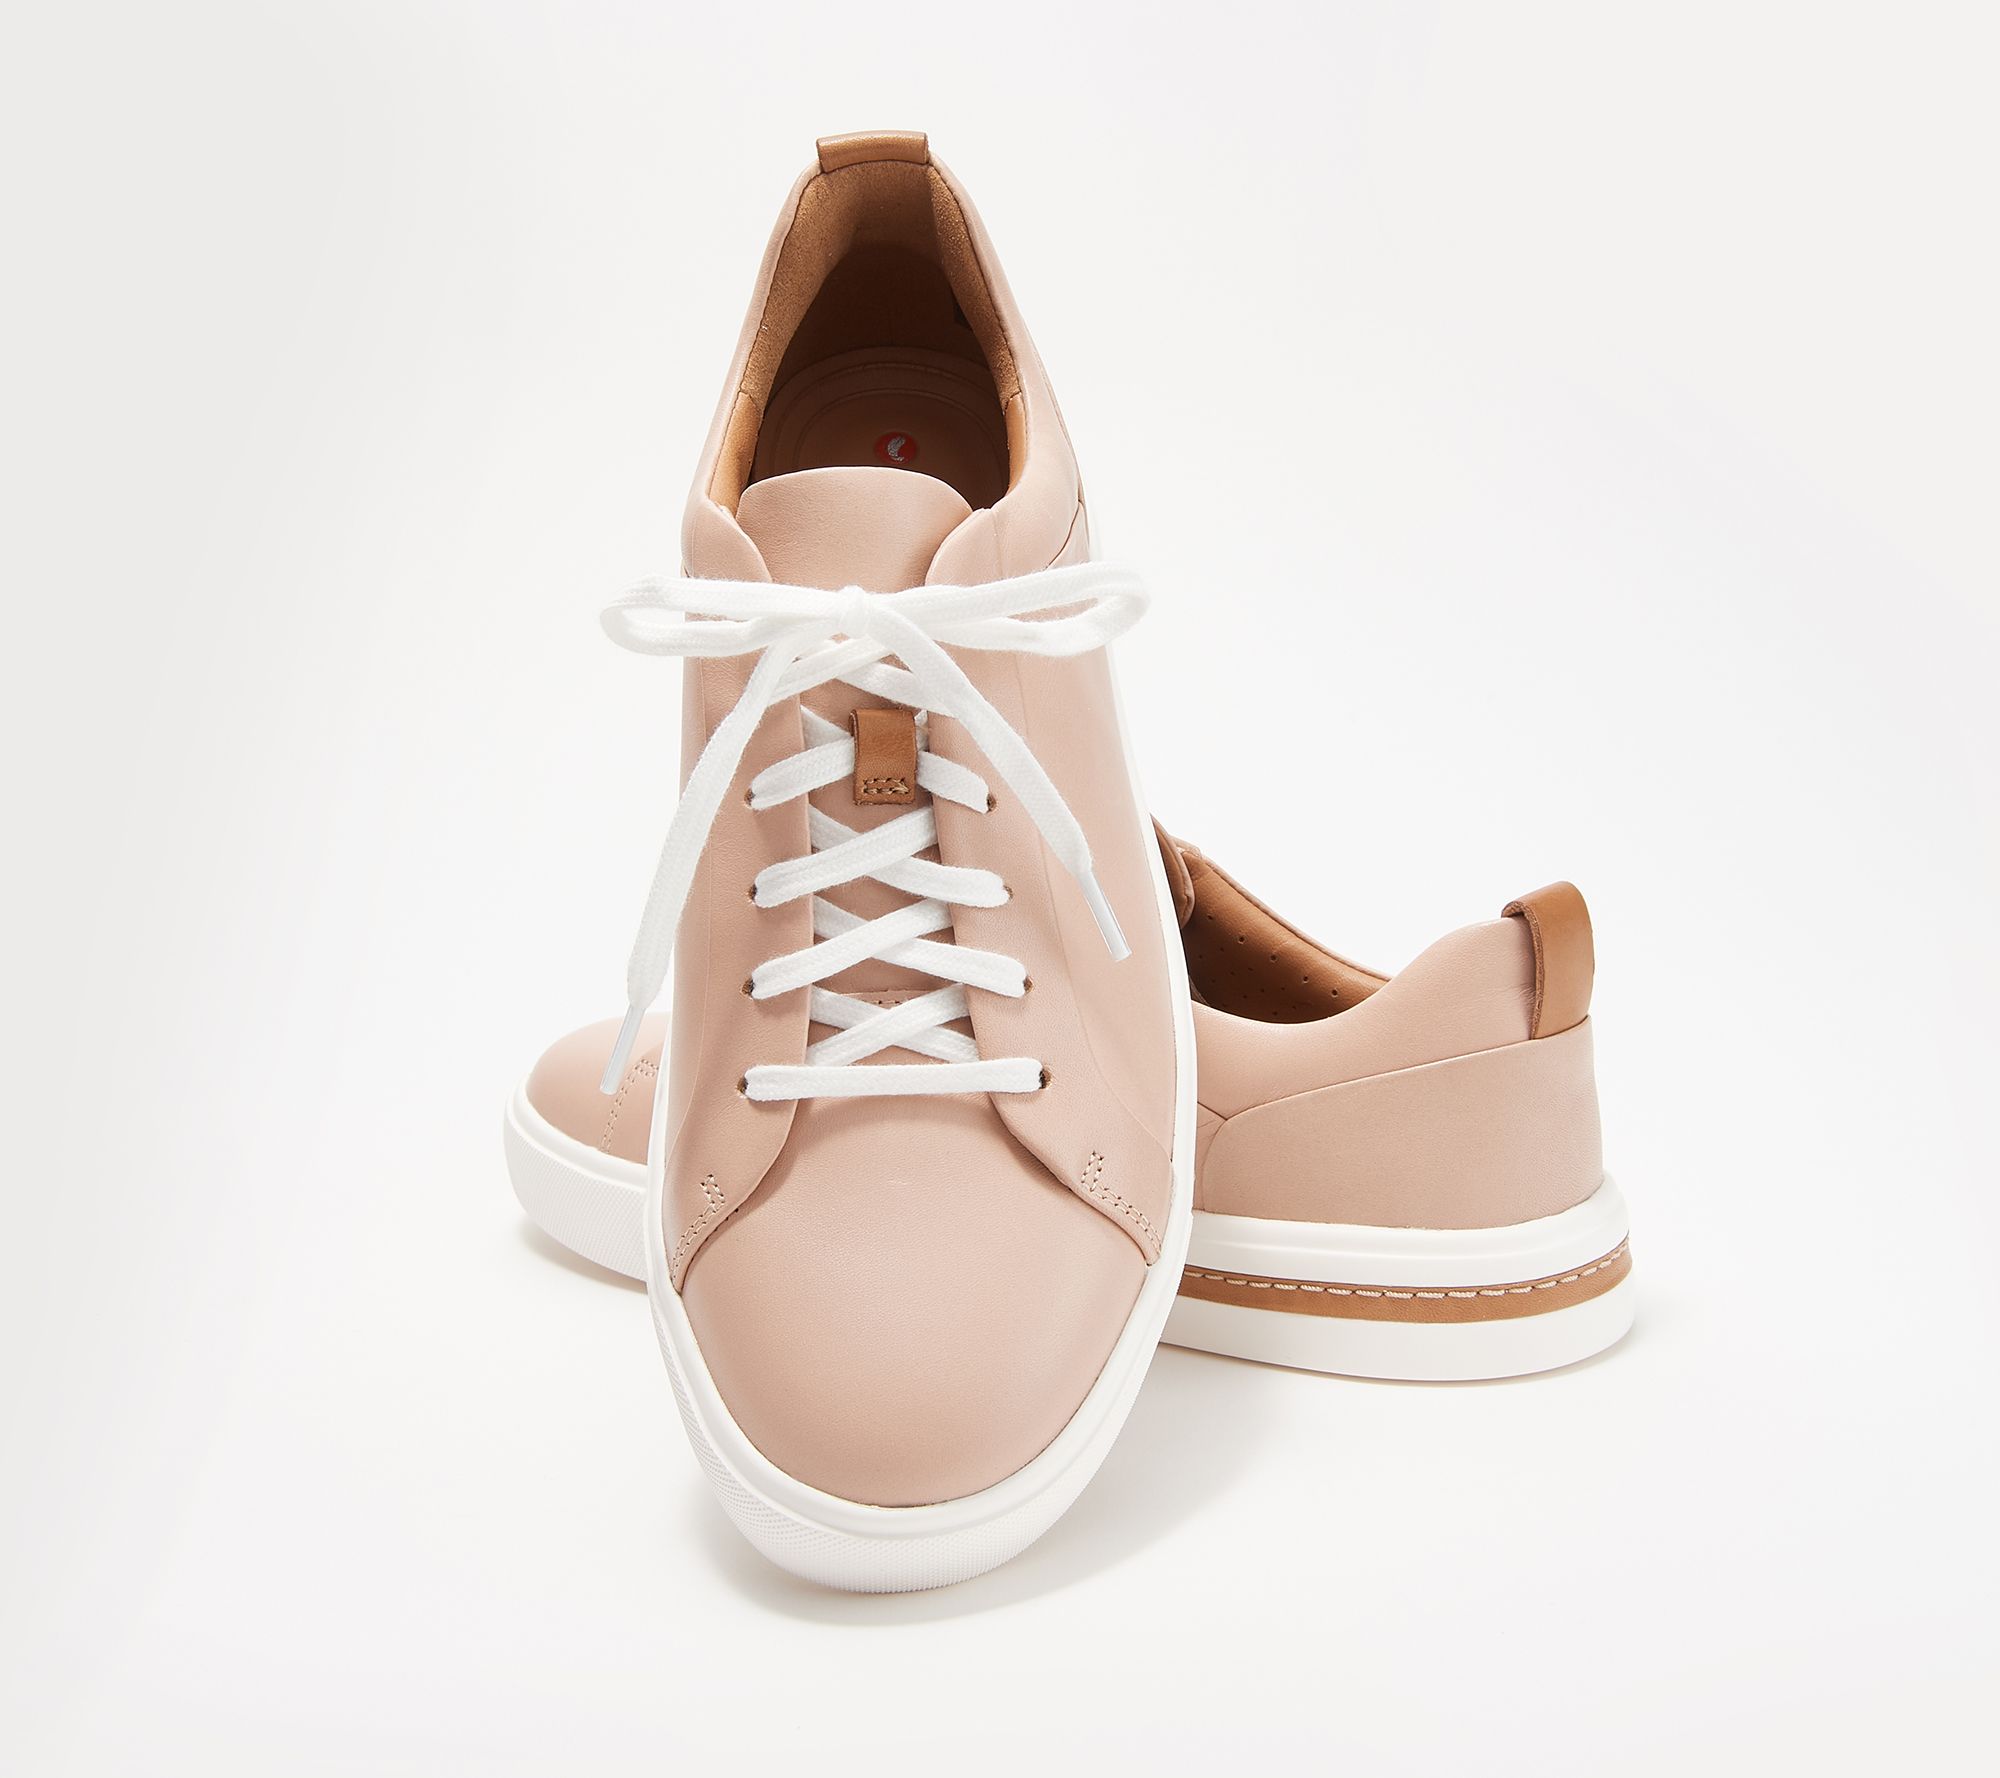 Clarks Unstructured Leather Casual Sneakers - Un Maui Lace - QVC.com